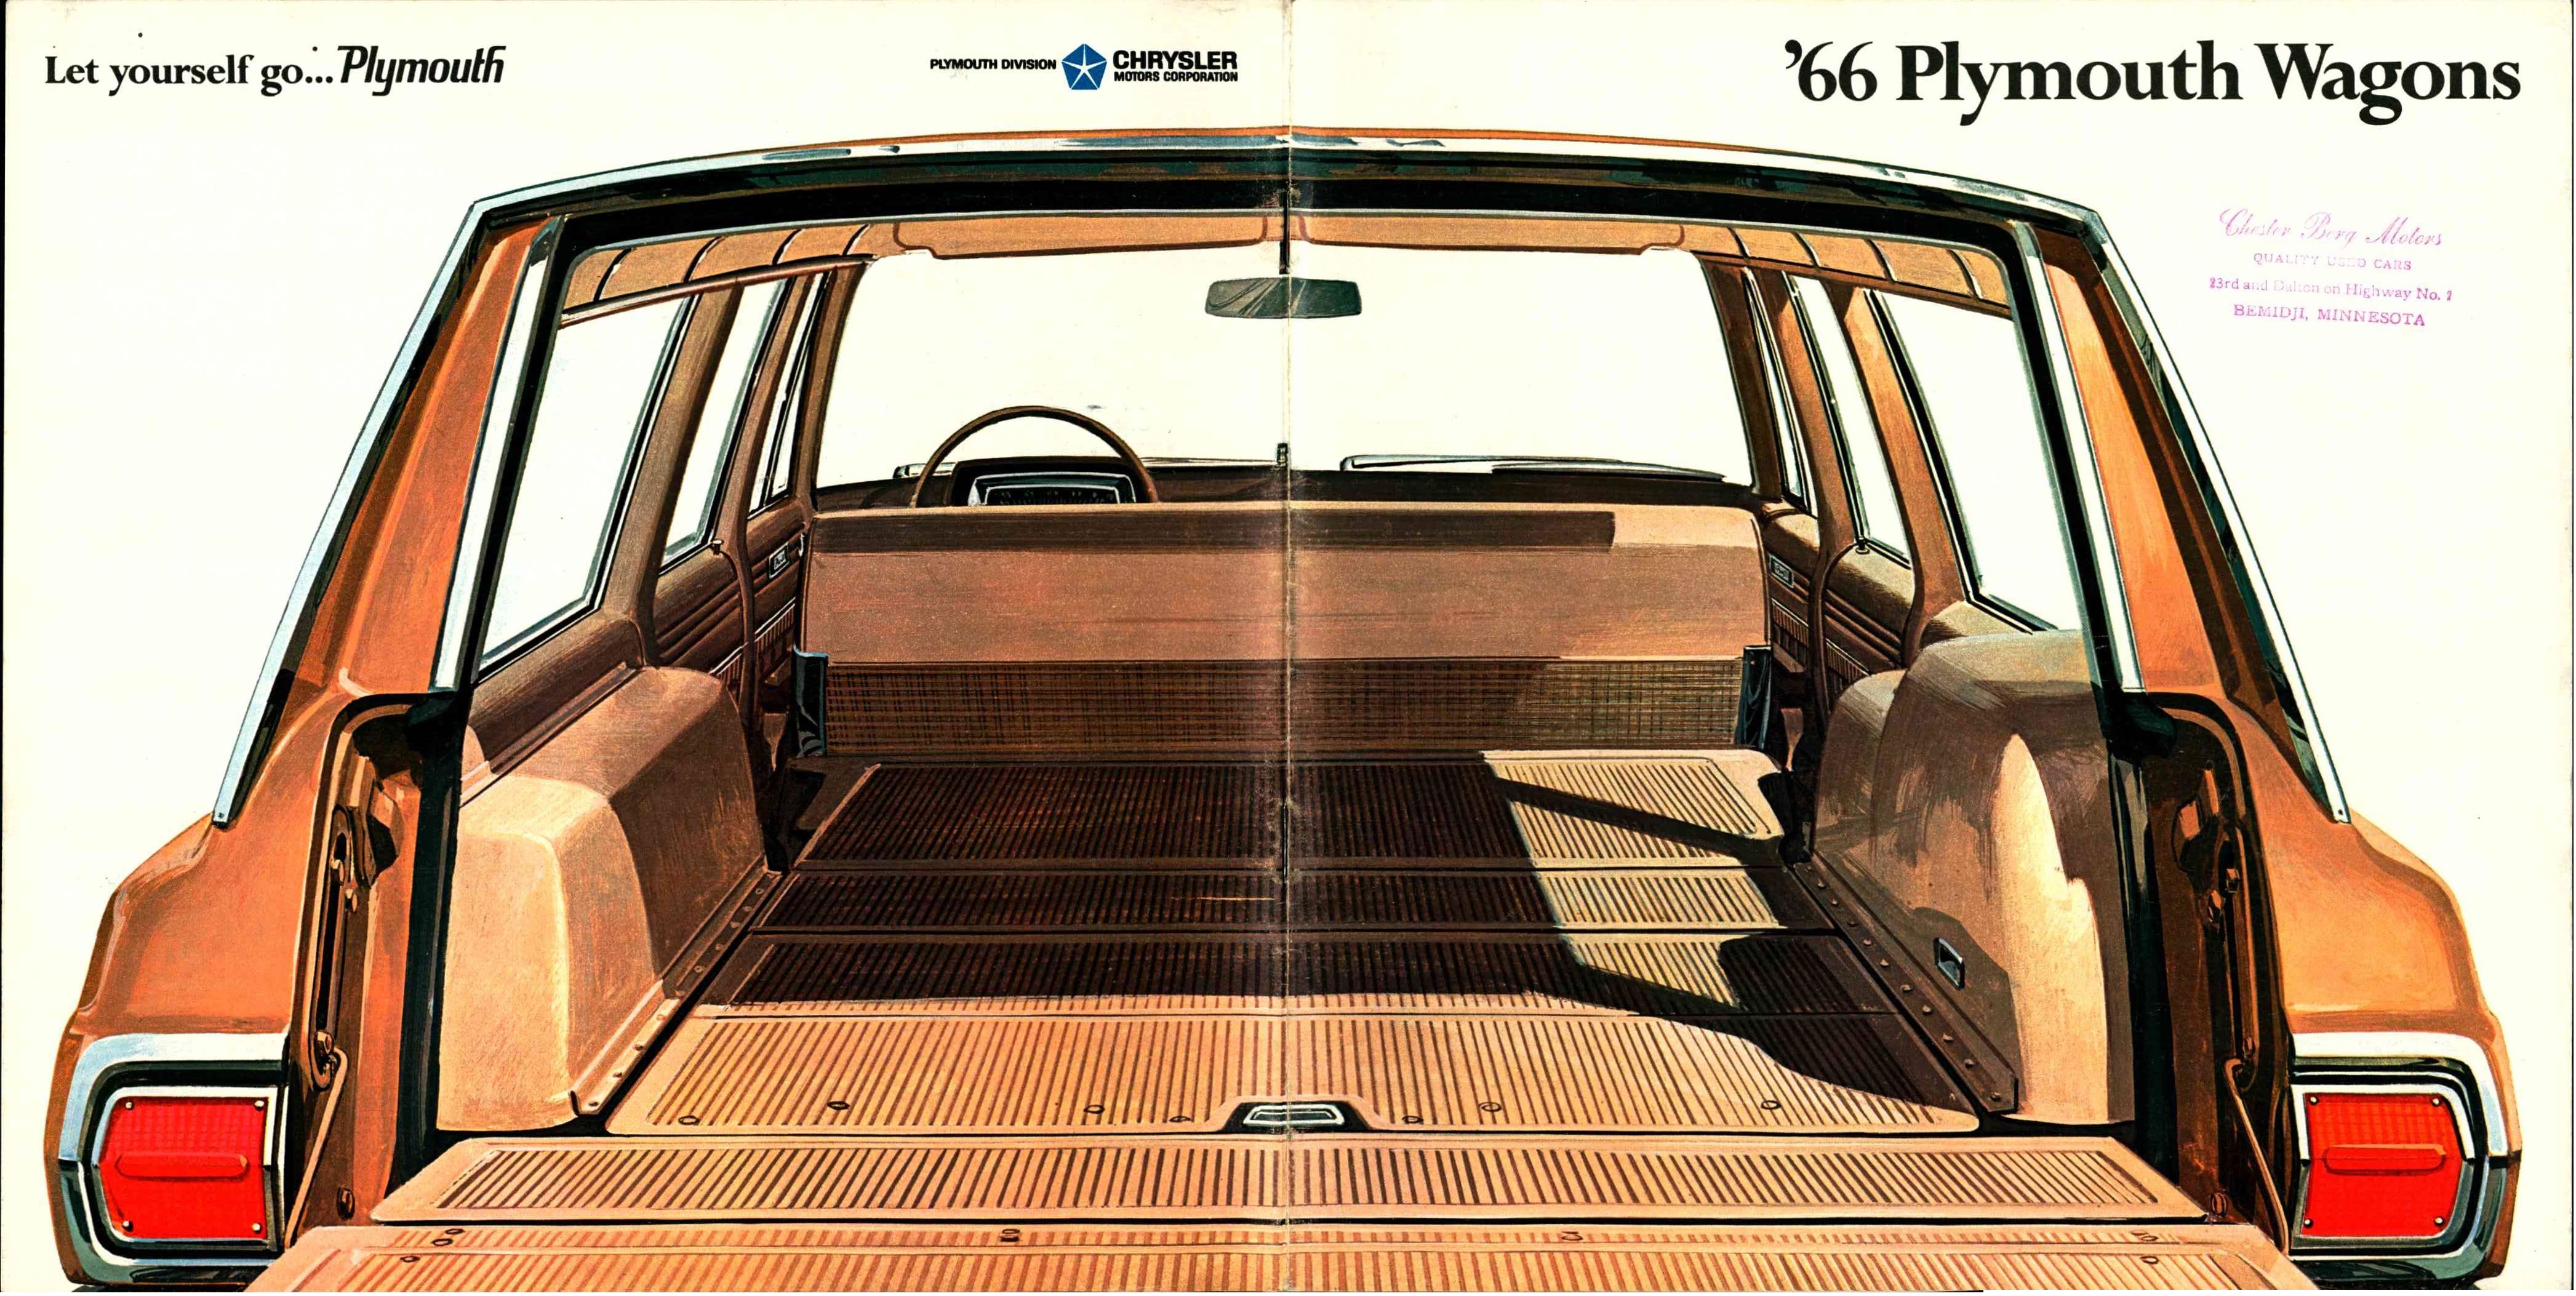 1966 Plymouth Wagons 16-01